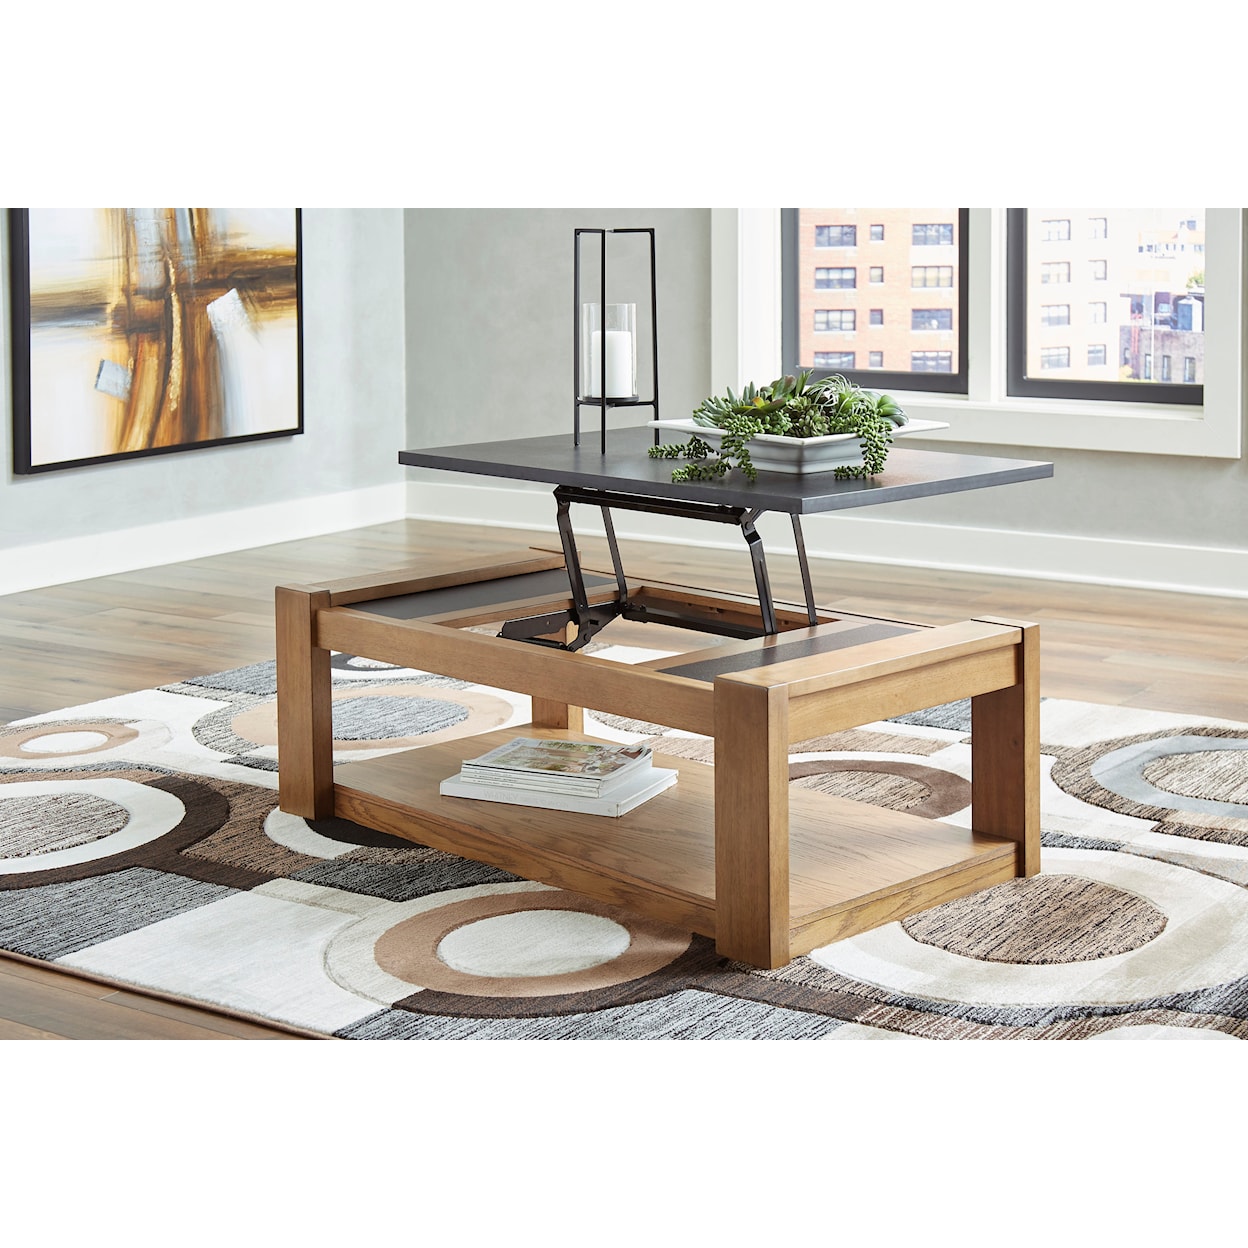 Signature Design by Ashley Furniture Quentina Lift Top Coffee Table